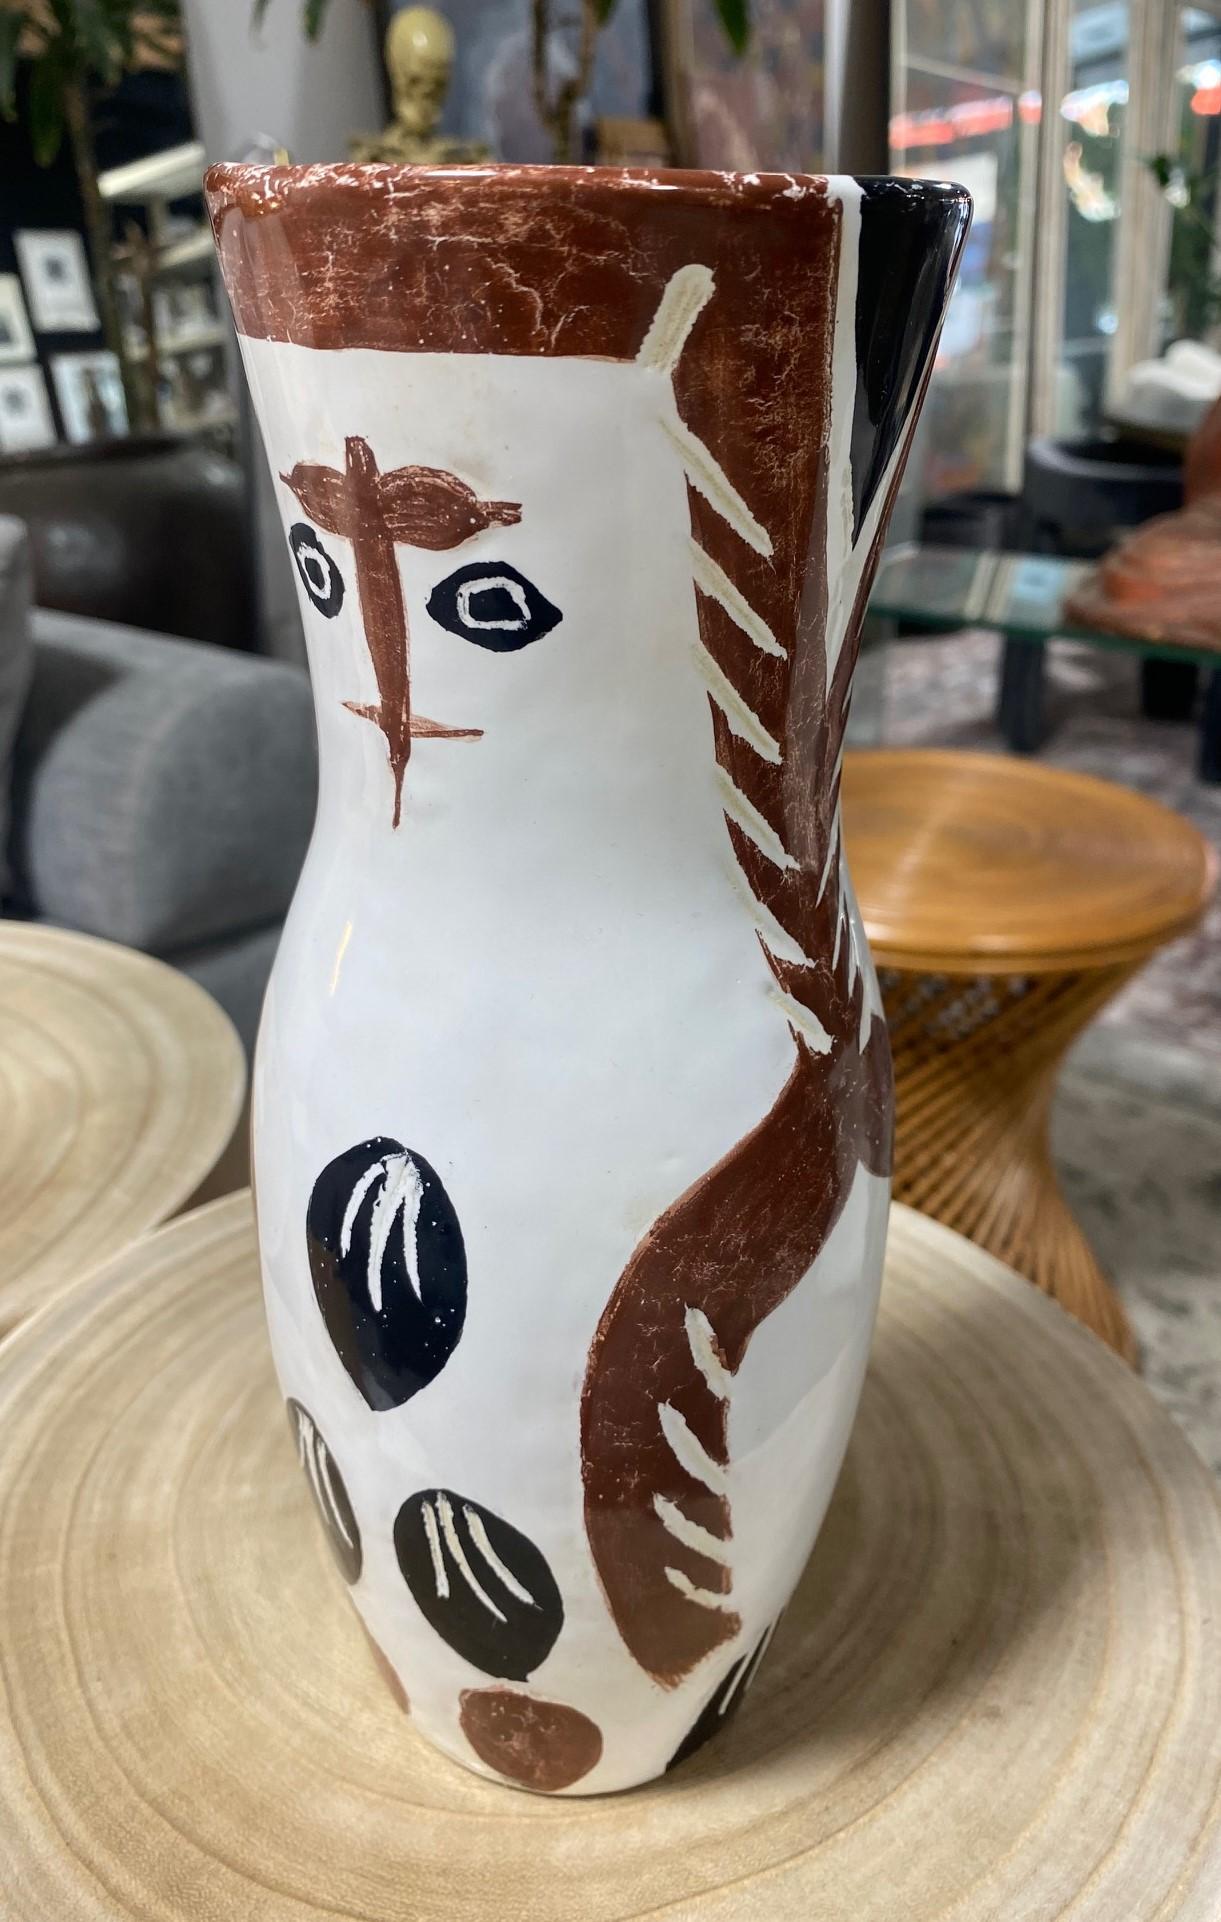 Pablo Picasso Signed Limited Madoura Pottery Chouetton Owl Vase A.R. 135, 1952 For Sale 4